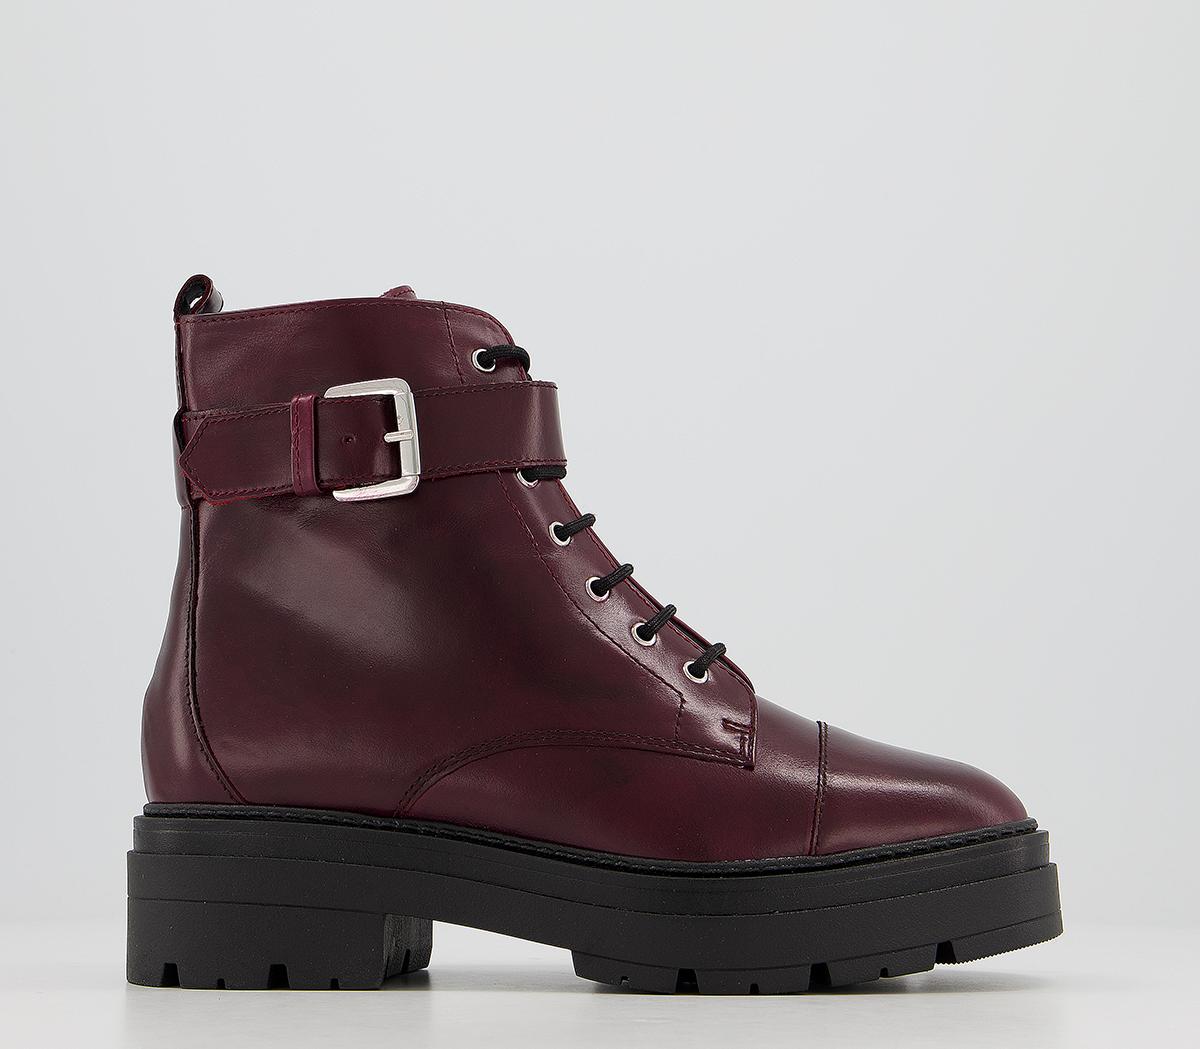 OFFICEAccurate Chunky Lace Up BootsBurgundy Leather